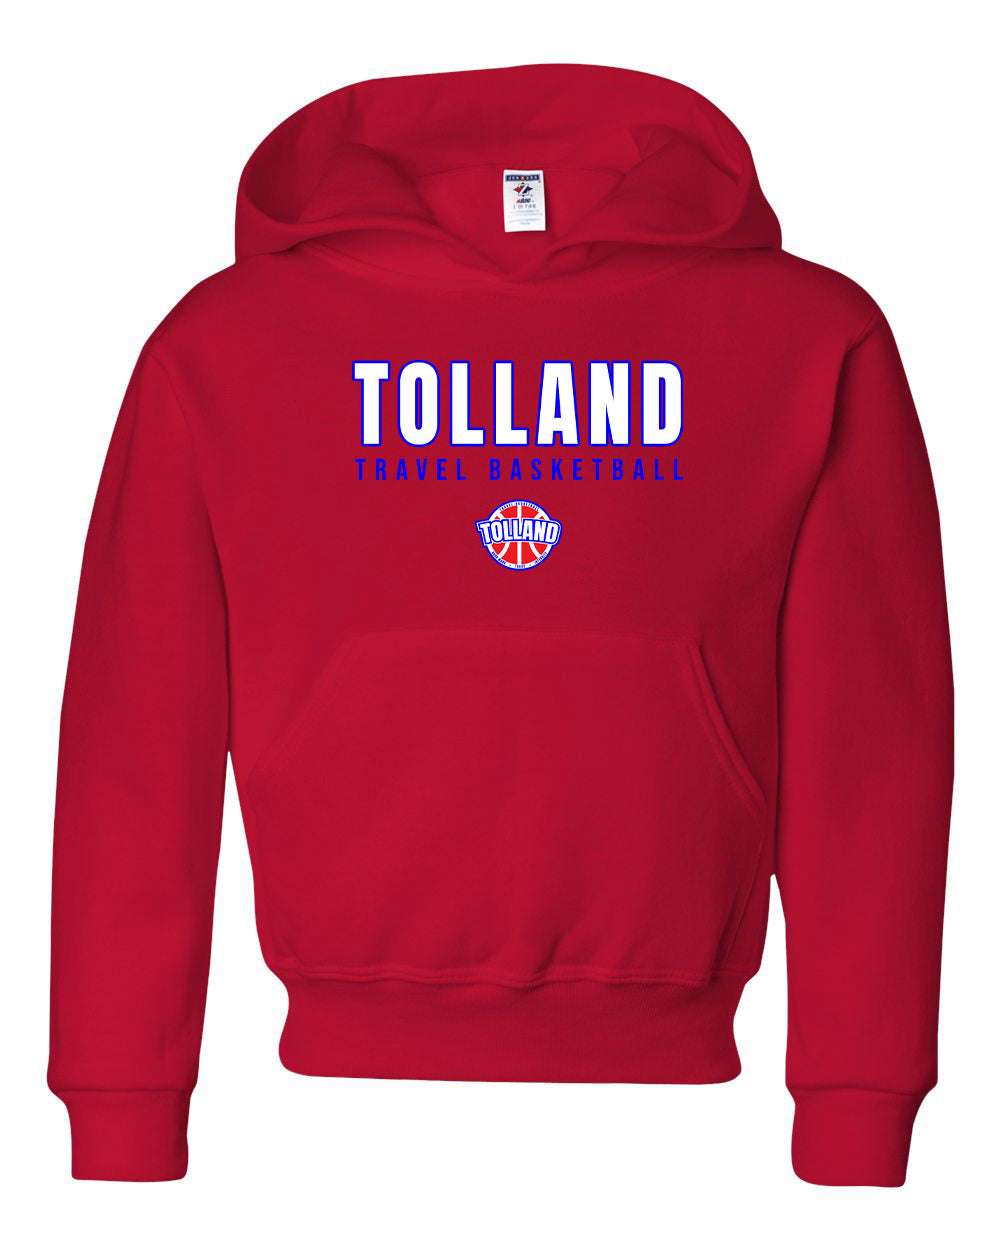 Tolland TB Youth Hoodie "TTB" - 996YR (color options available)